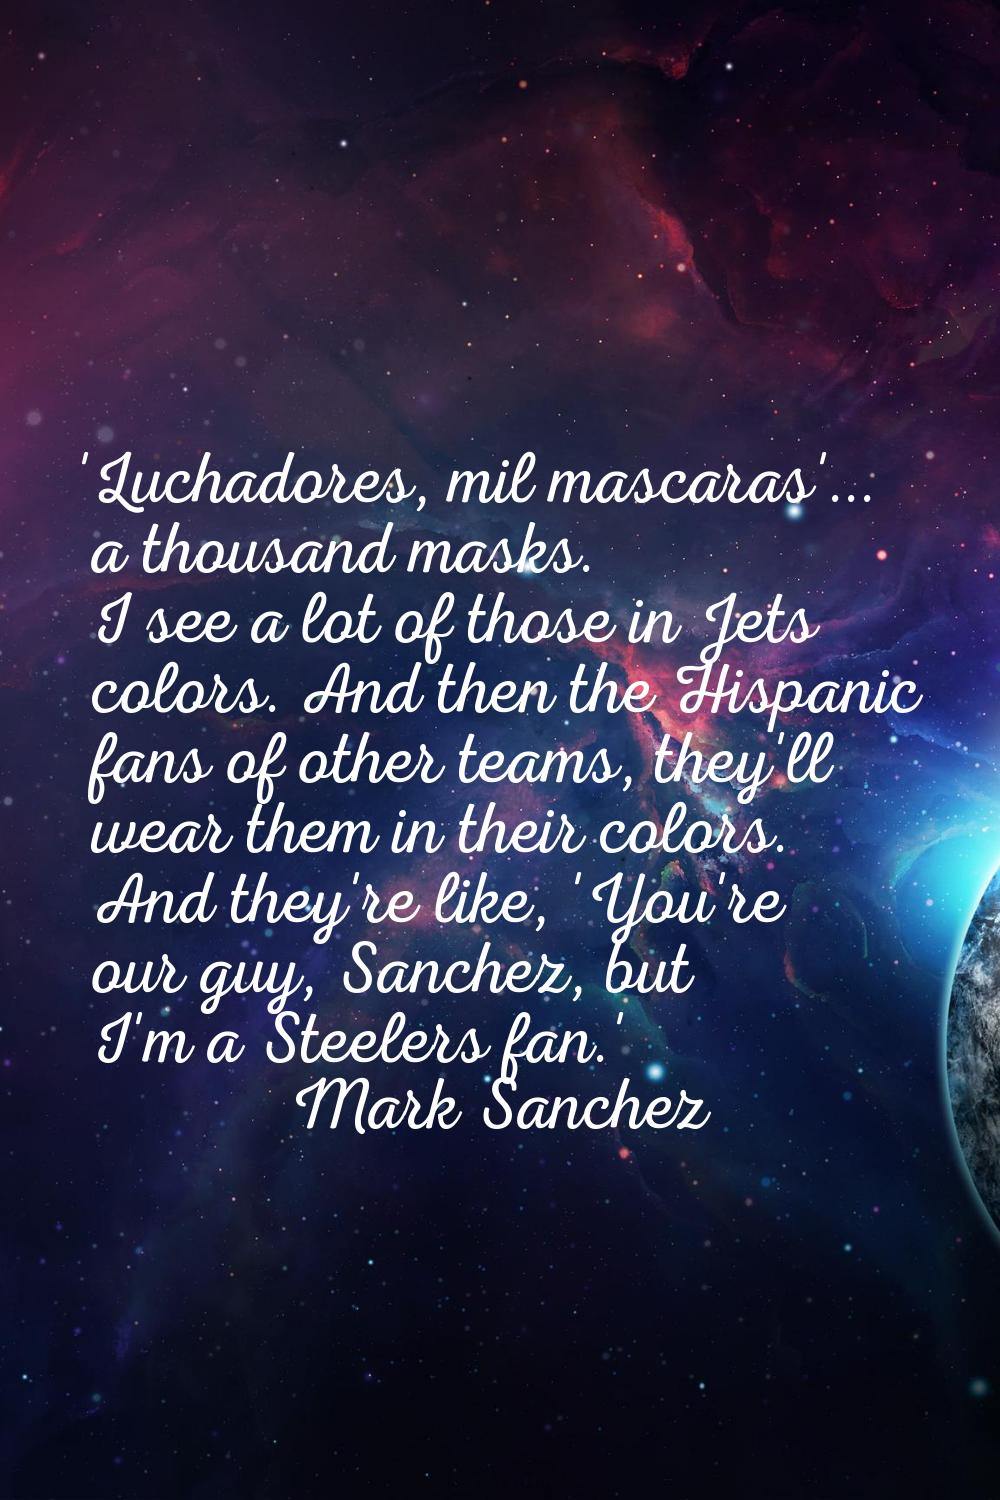 'Luchadores, mil mascaras'... a thousand masks. I see a lot of those in Jets colors. And then the H